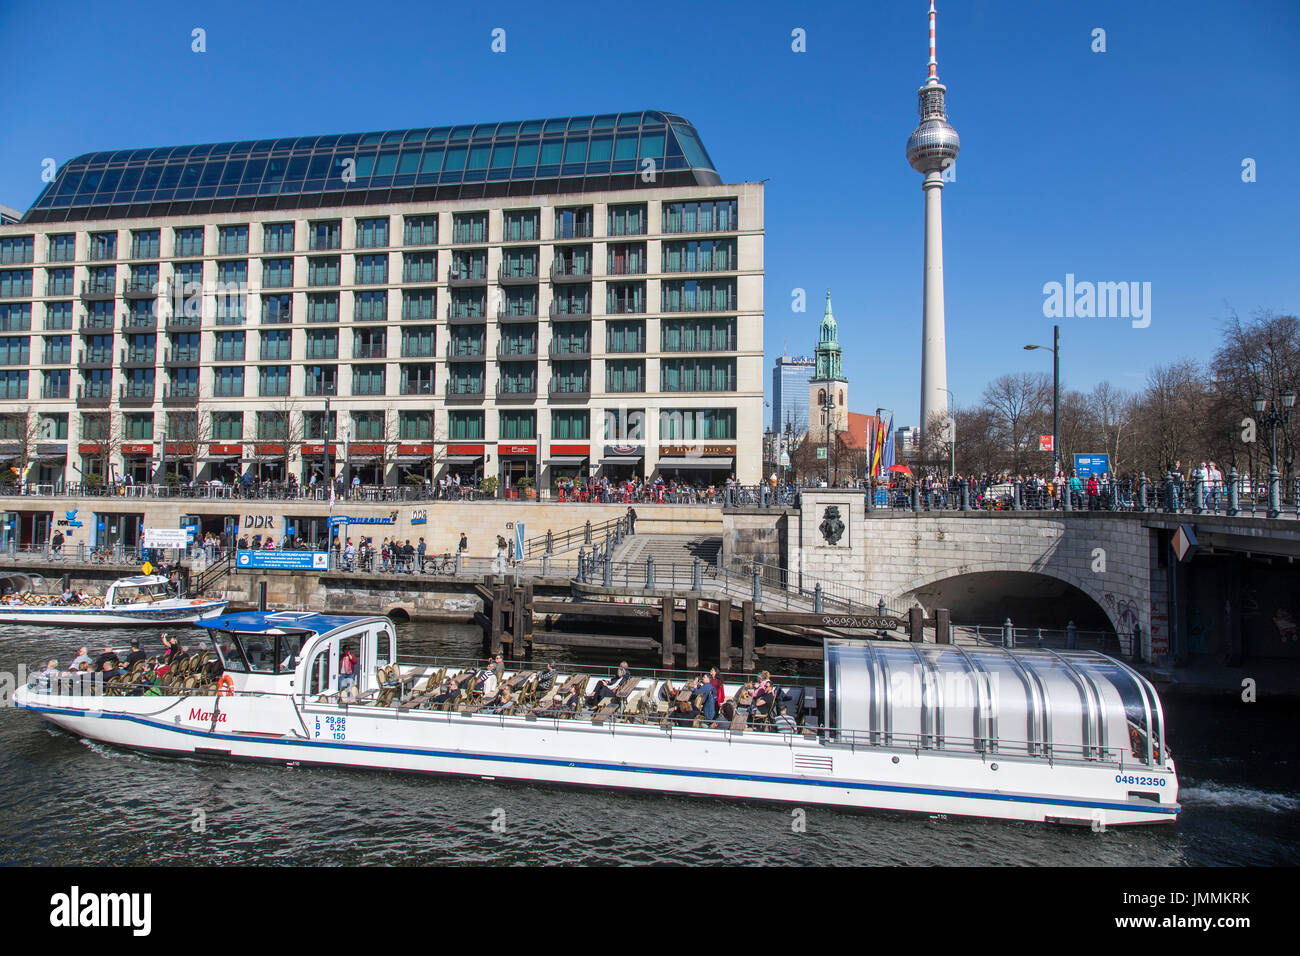 Berlin, Germany, Alexander Square, downtown, Mitte district, Berlin TV tower, Radisson Blu Hotel, river Spree, sightseeing boat, Stock Photo